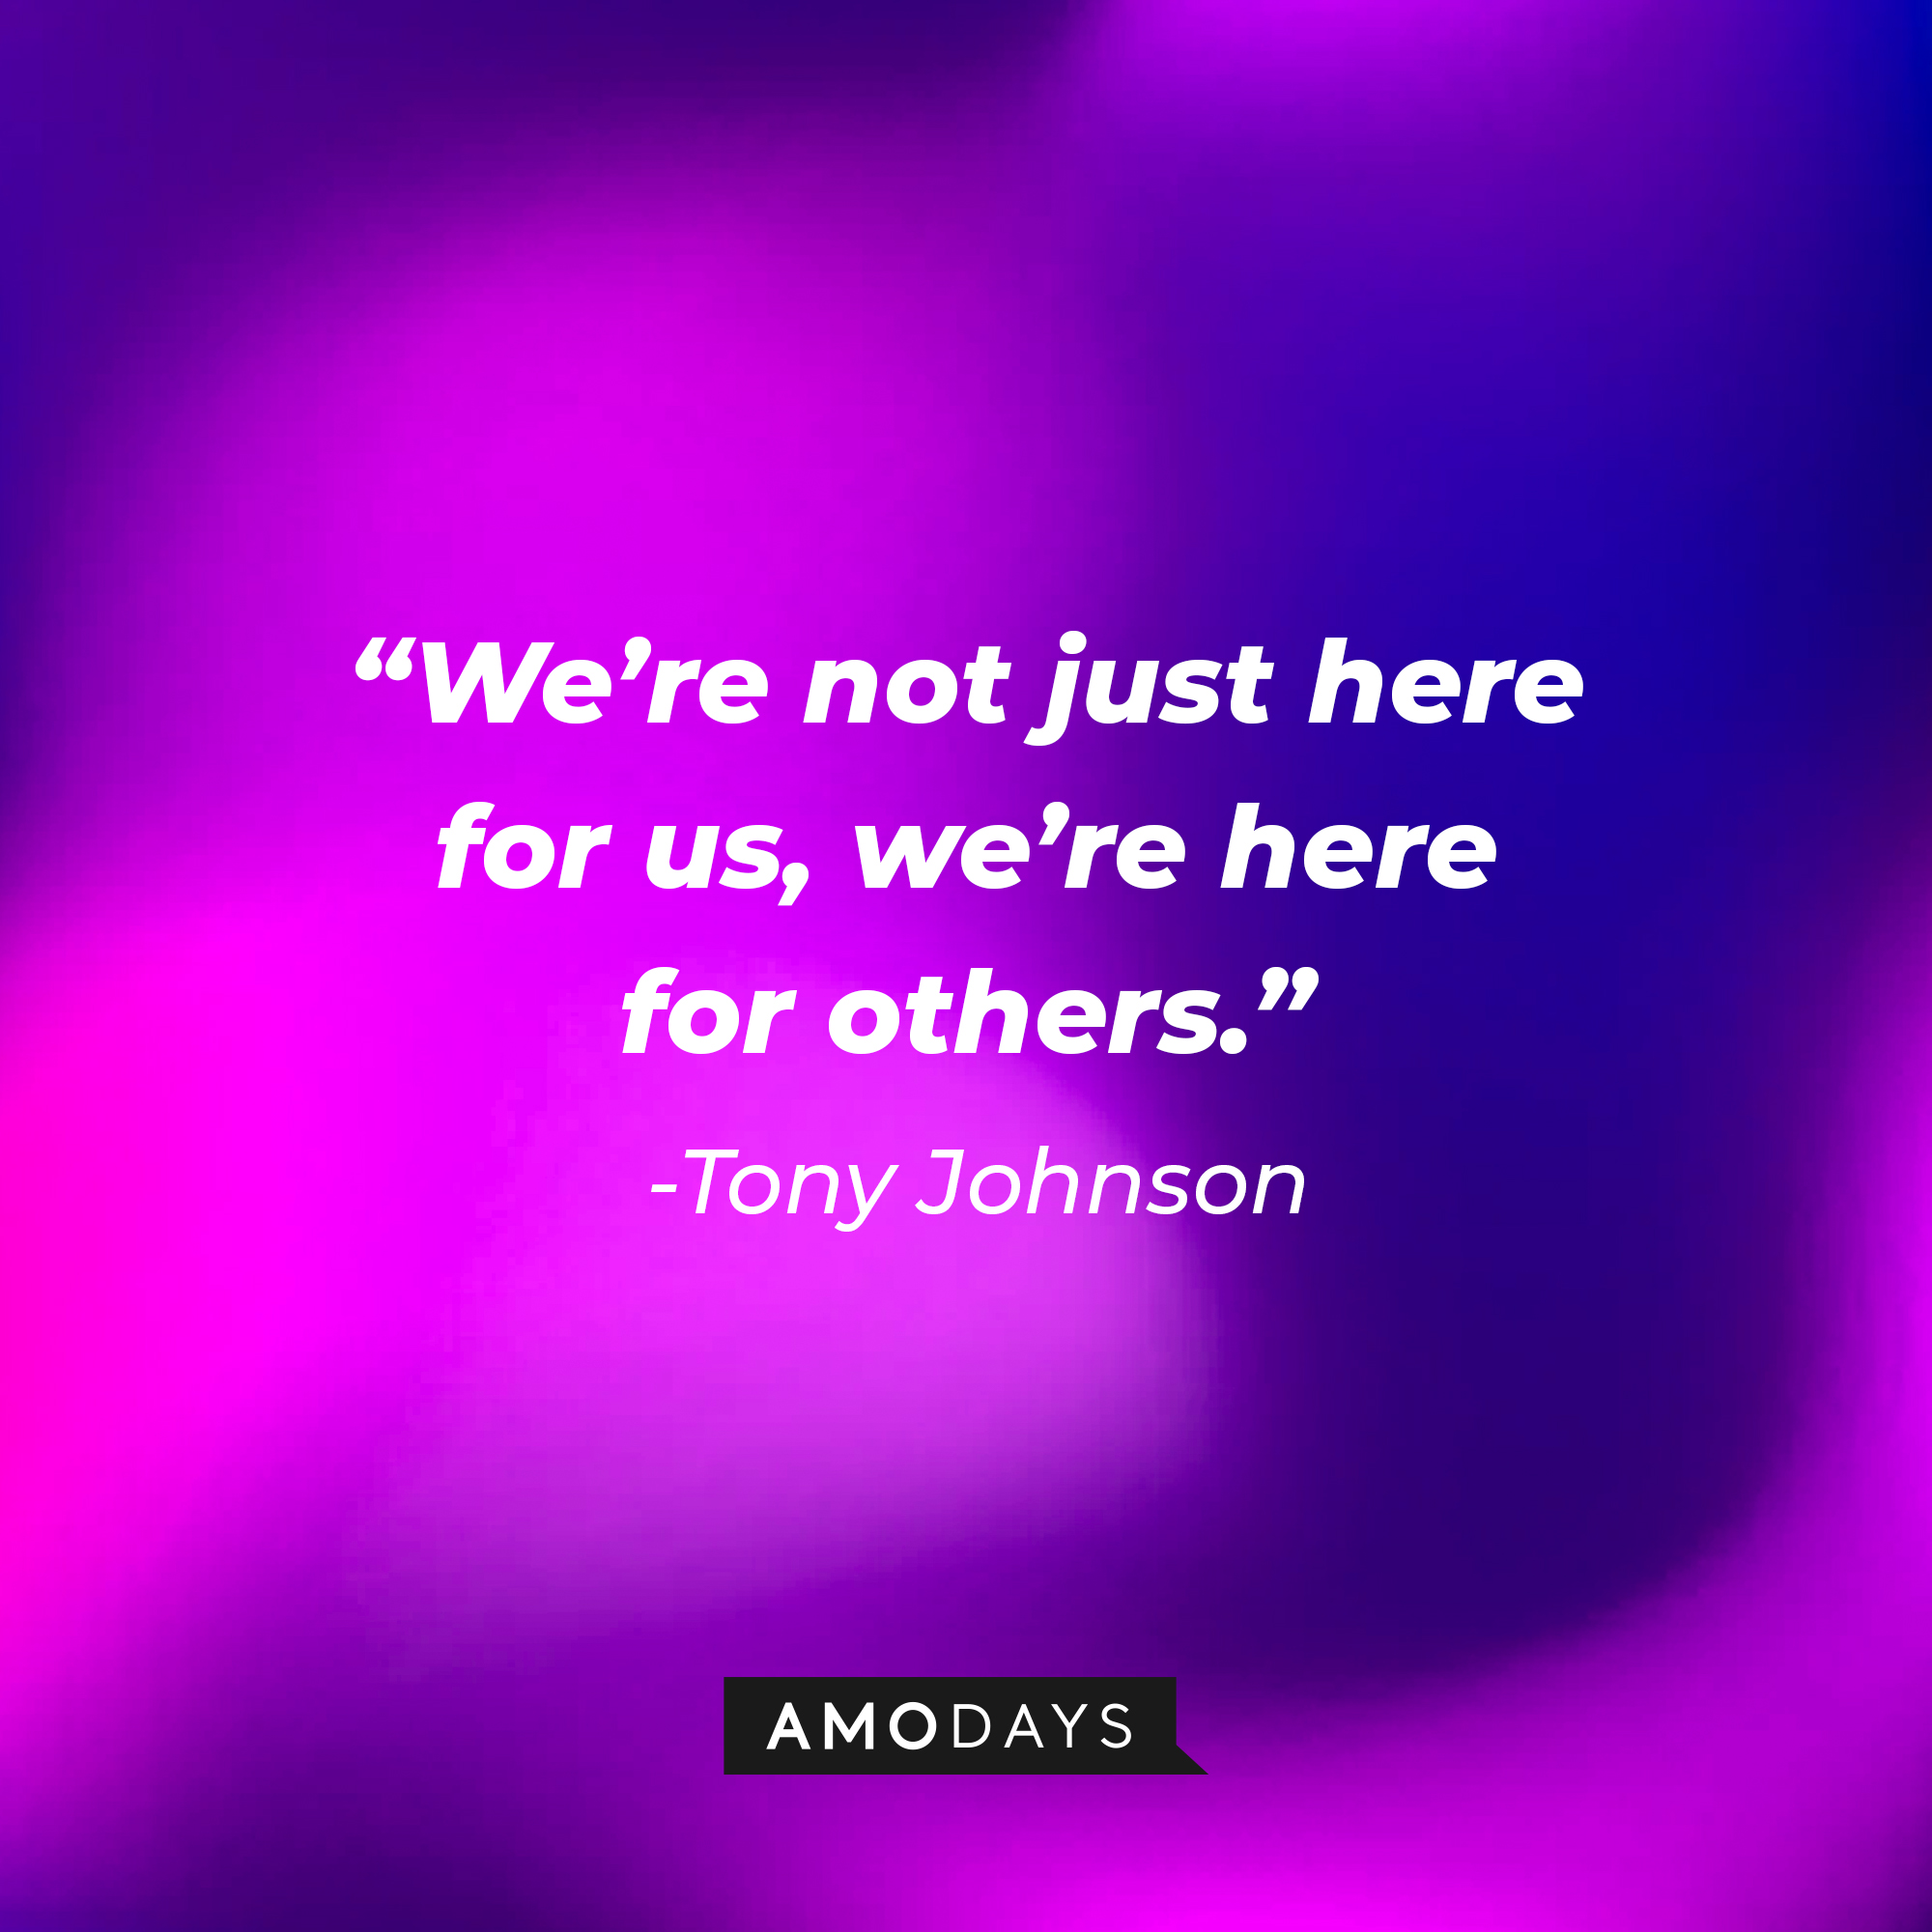 Tony Johnson’s quote: “We’re not just here for us, we’re here for others.” |  Source: AmoDays